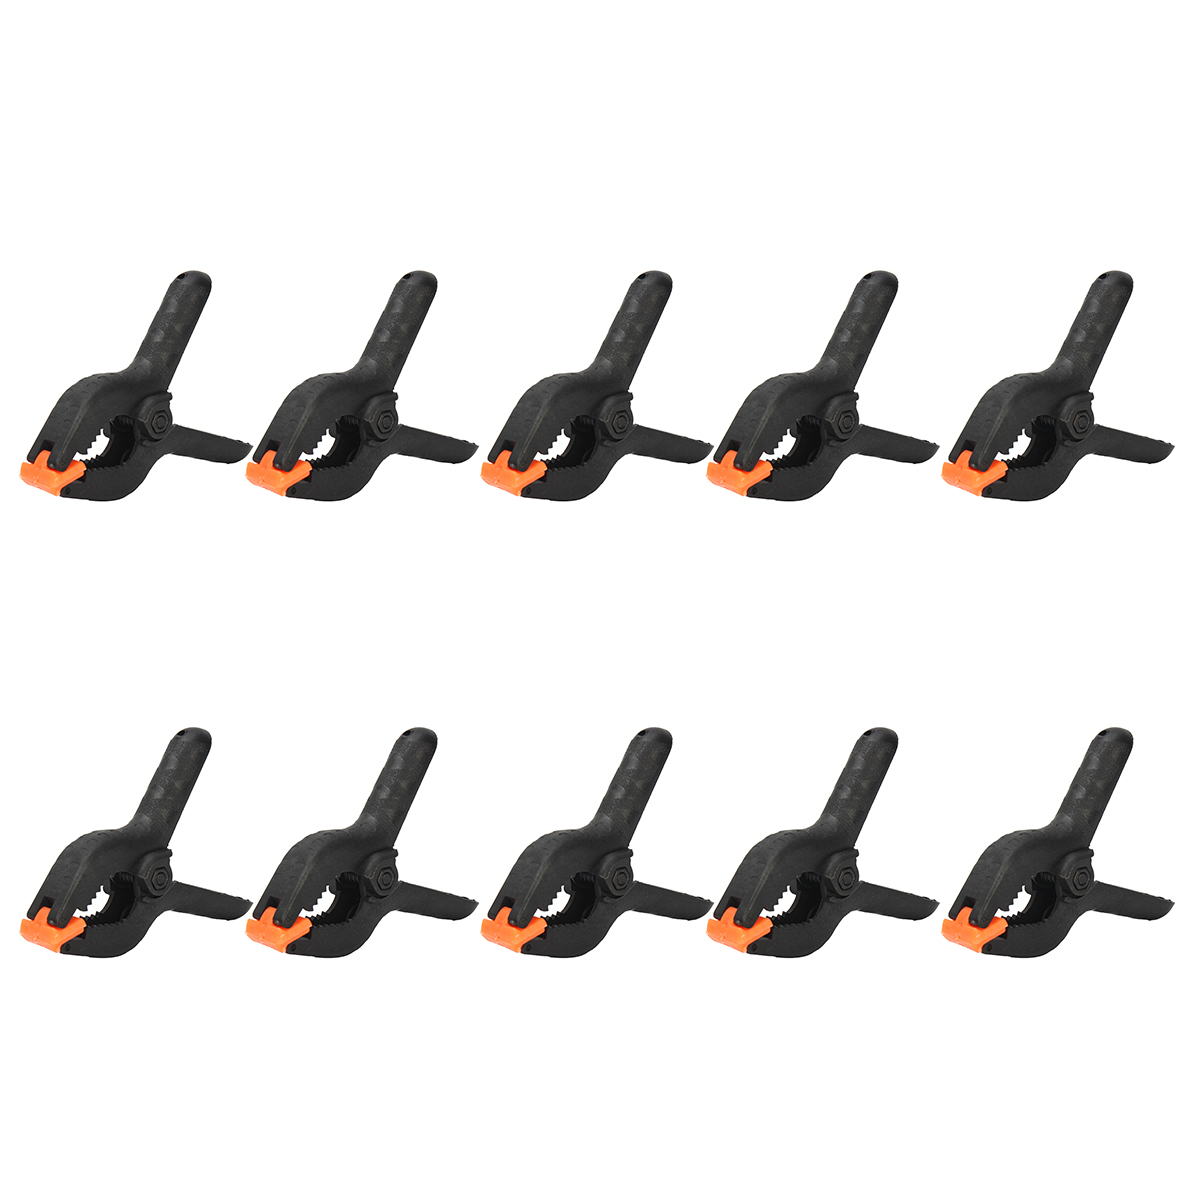 10PCS 4 inch Spring Clamps DIY Tools Plastic Nylon For Woodworking Hobbies 13